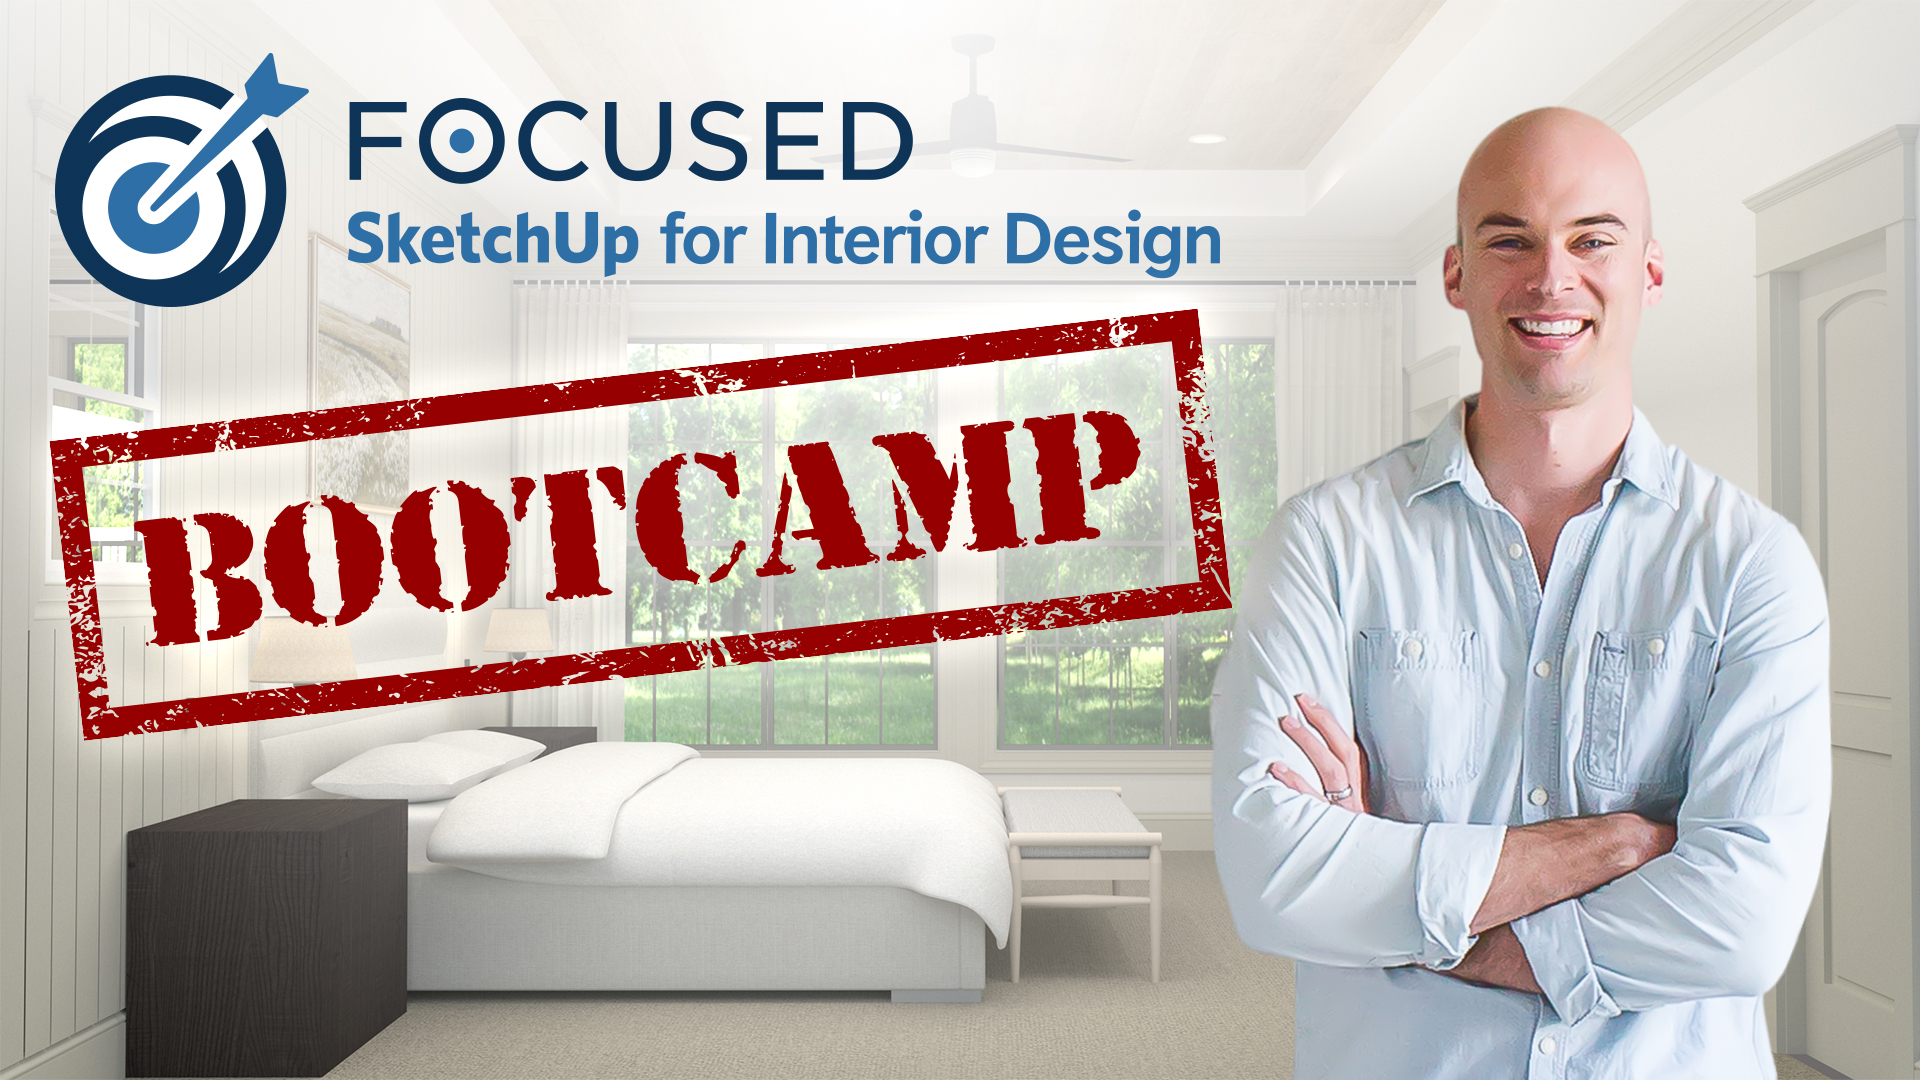 7-Day Bootcamp - FOCUSED SketchUp for Interior Design